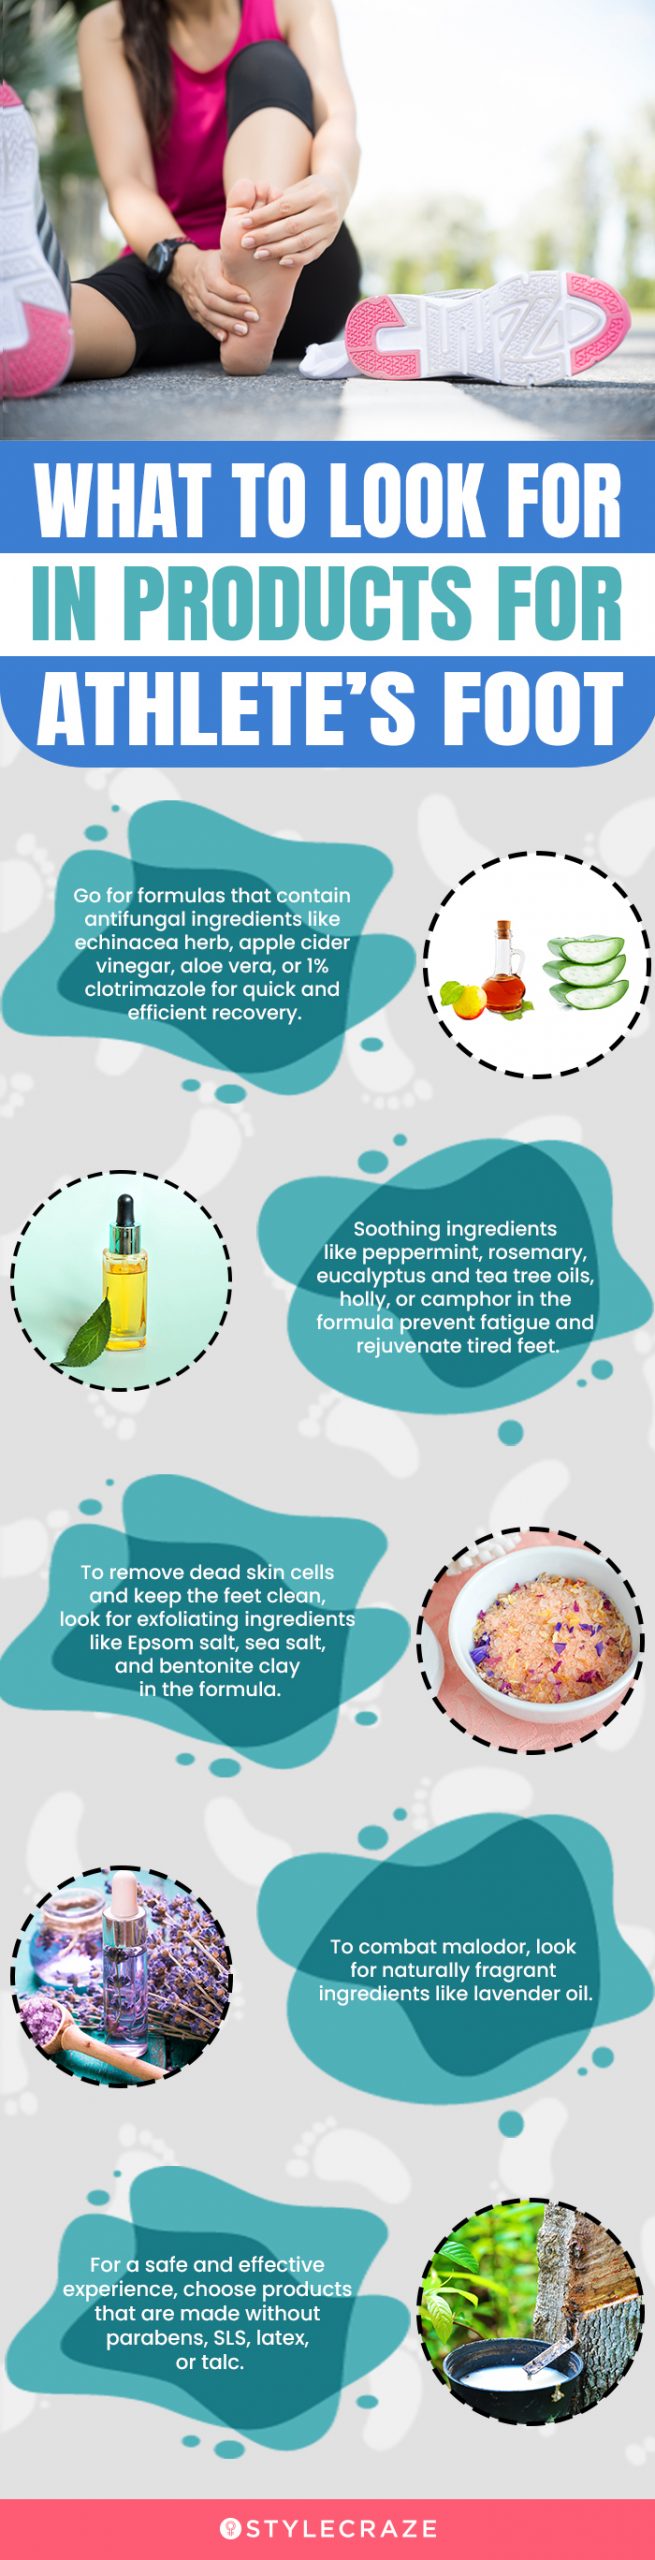 What To Look For In Products For Athlete’s Foot (infographic)